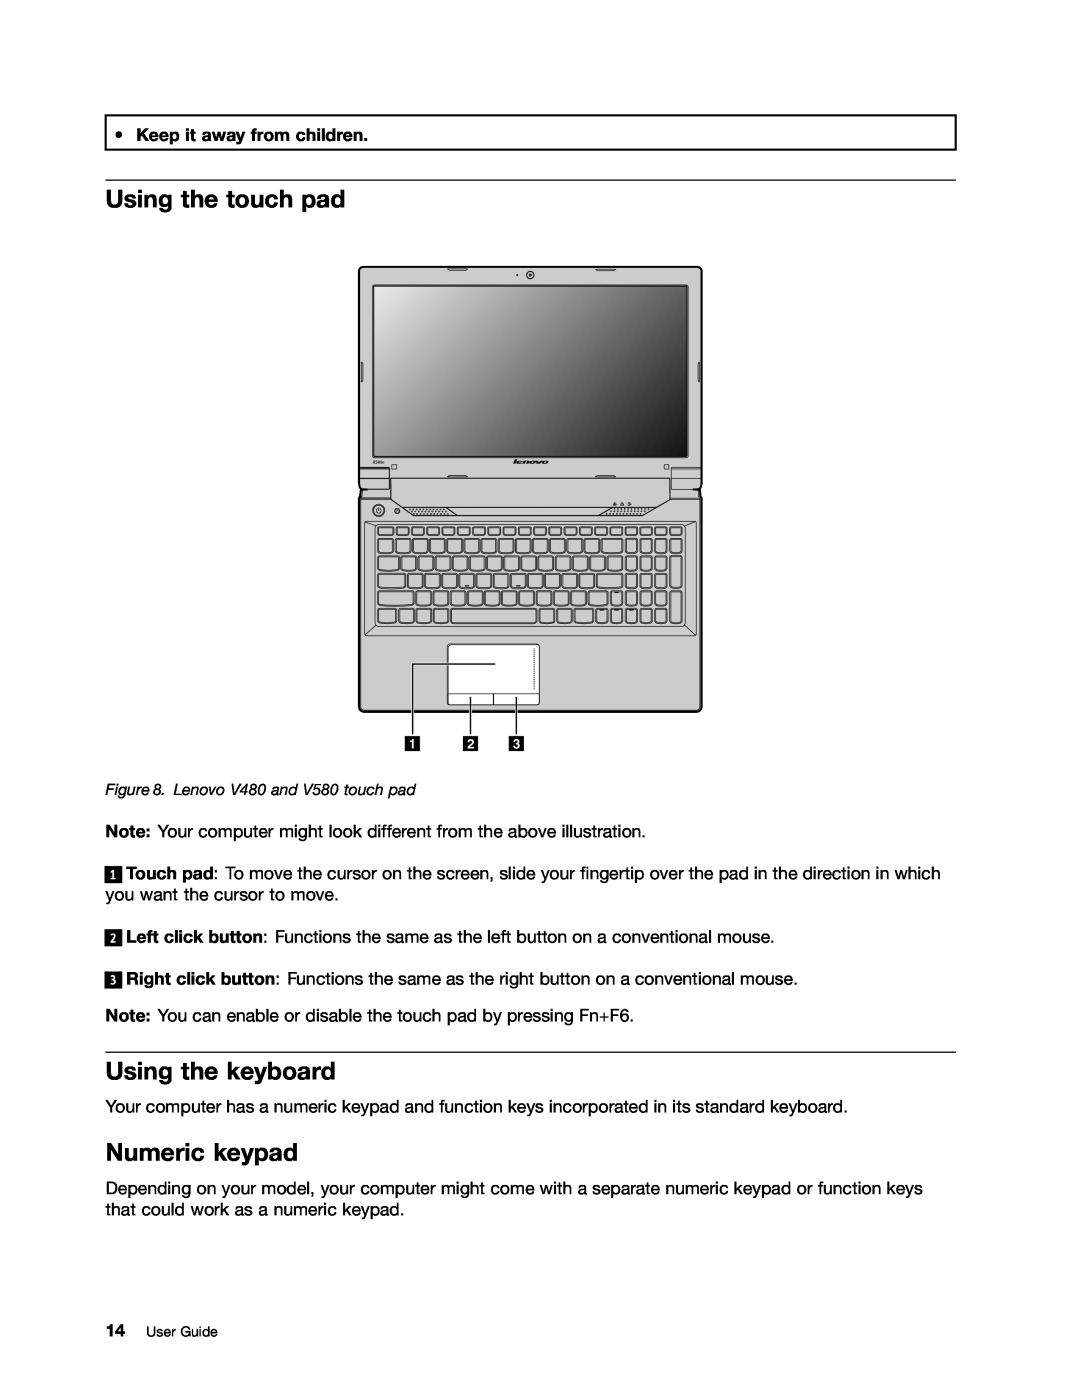 Lenovo B590, 59366616, B490 manual Using the touch pad, Using the keyboard, Numeric keypad, Keep it away from children 